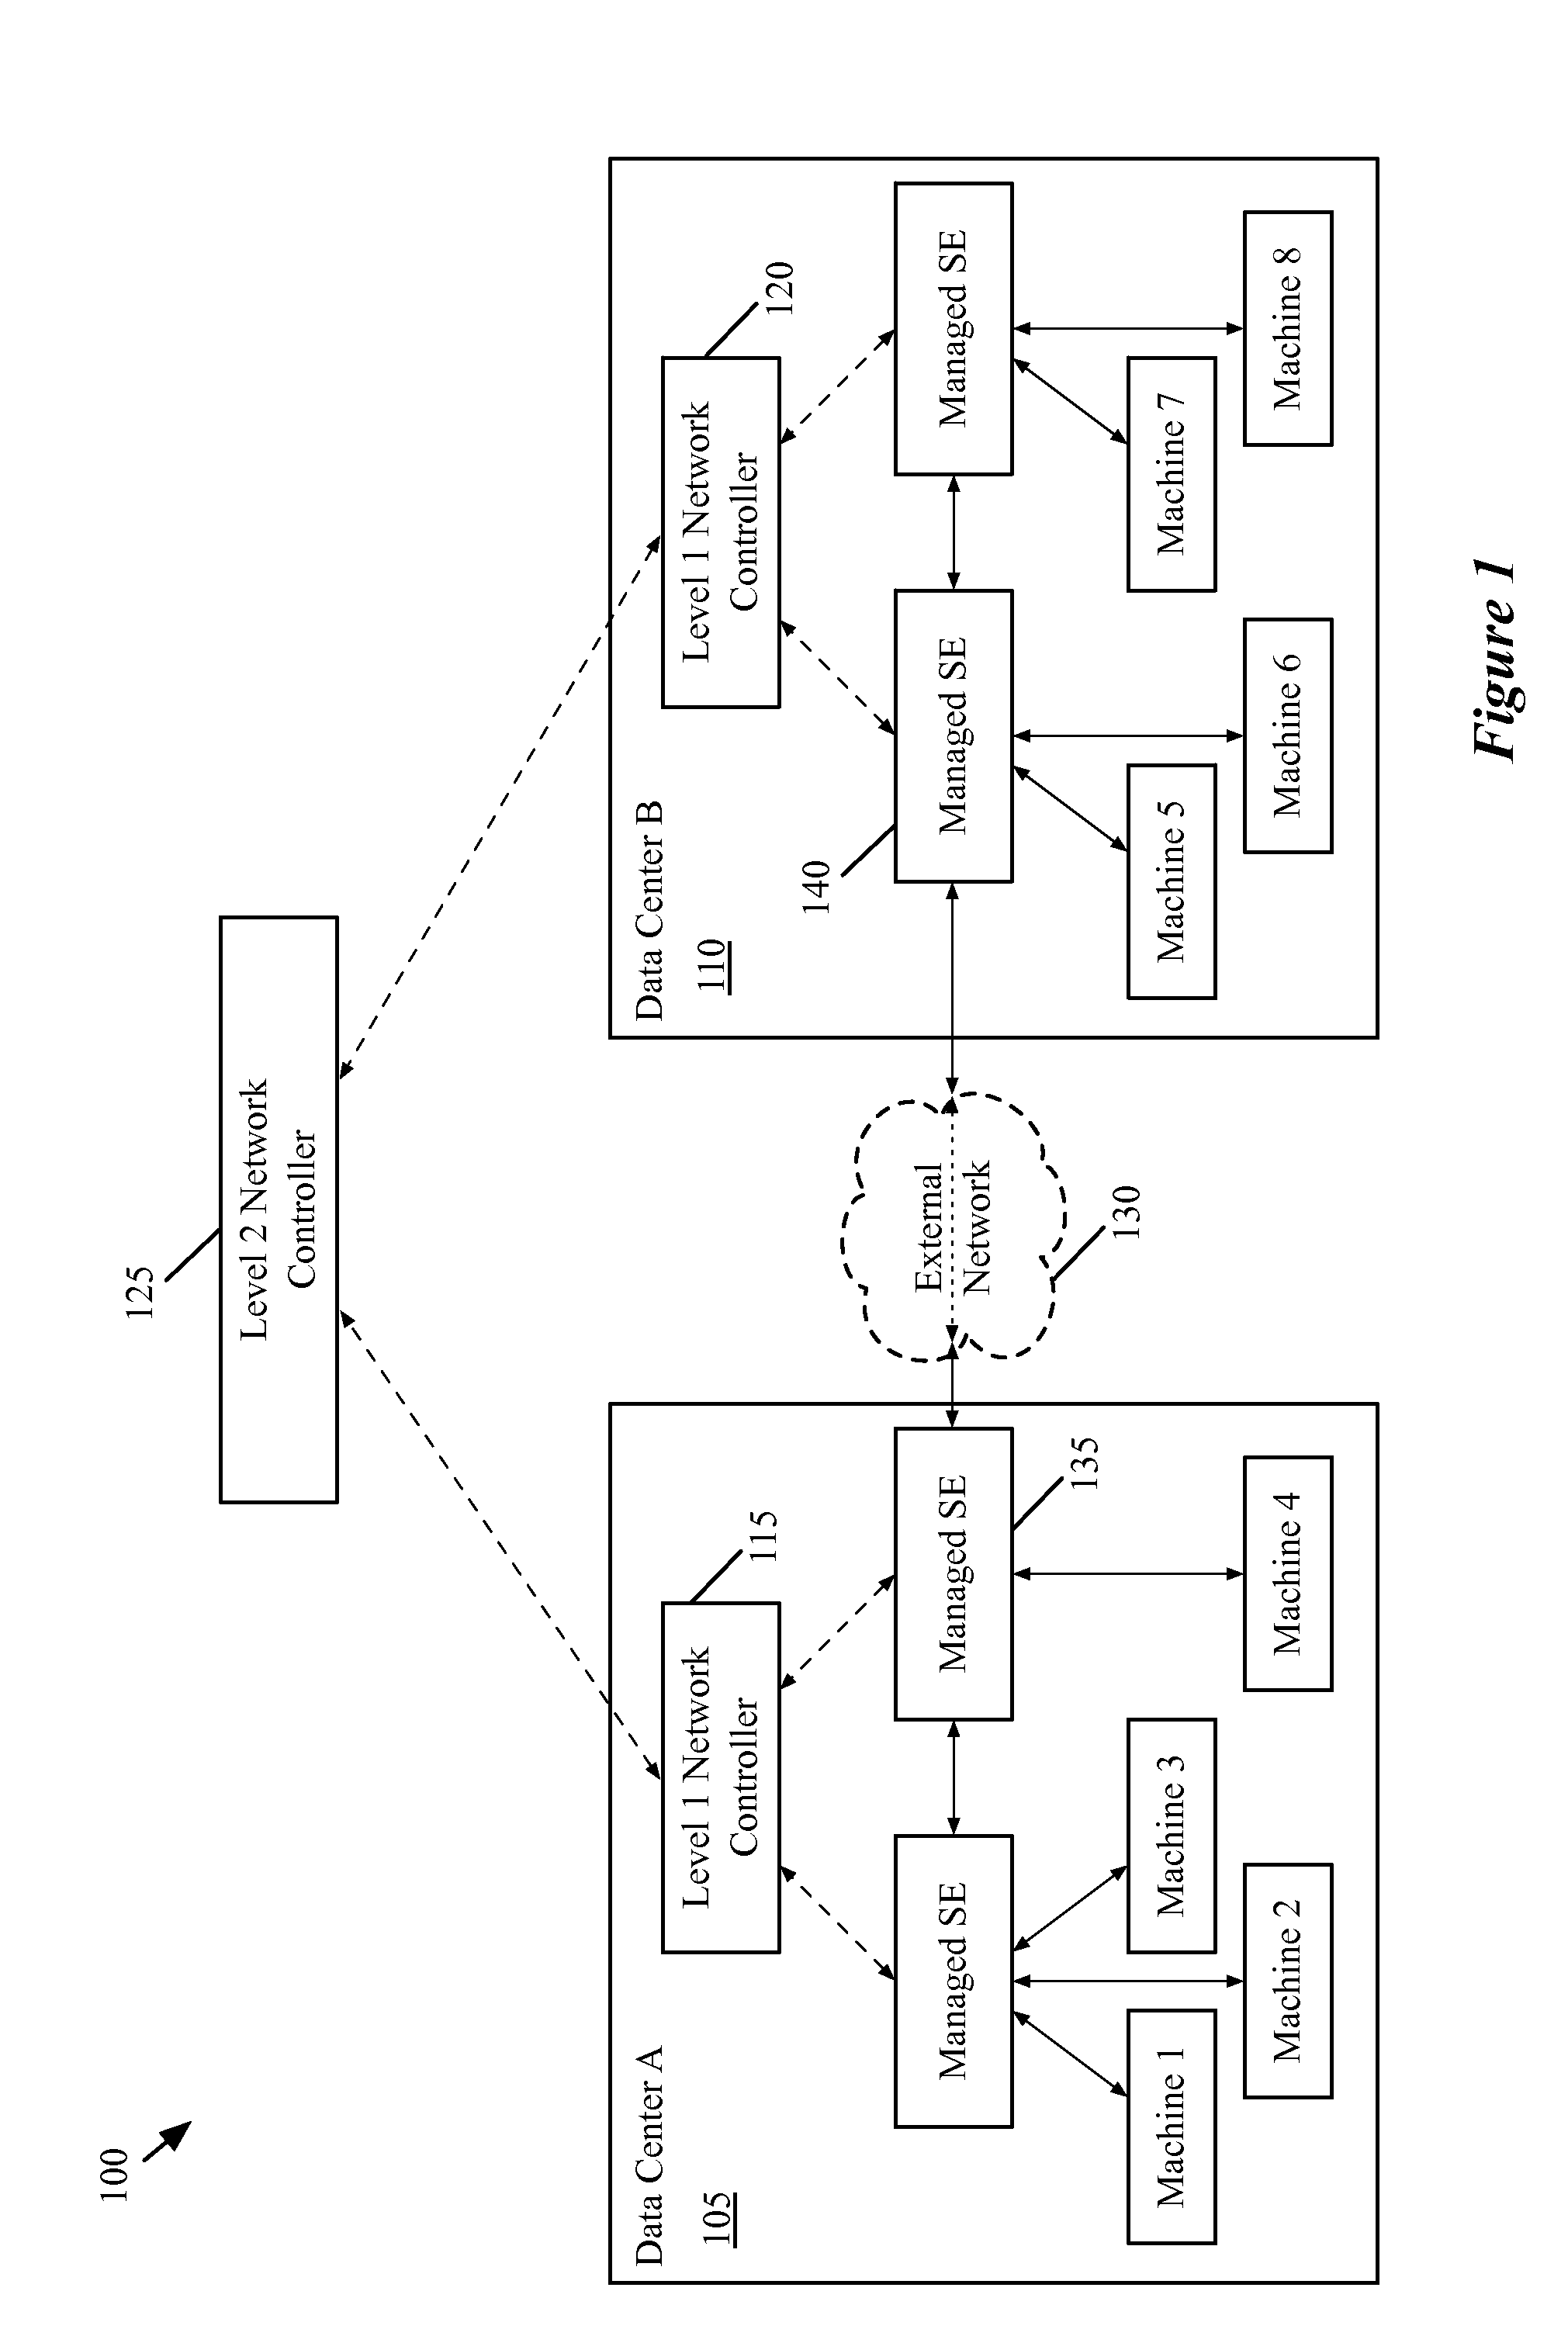 Federating interconnection switching element network to two or more levels